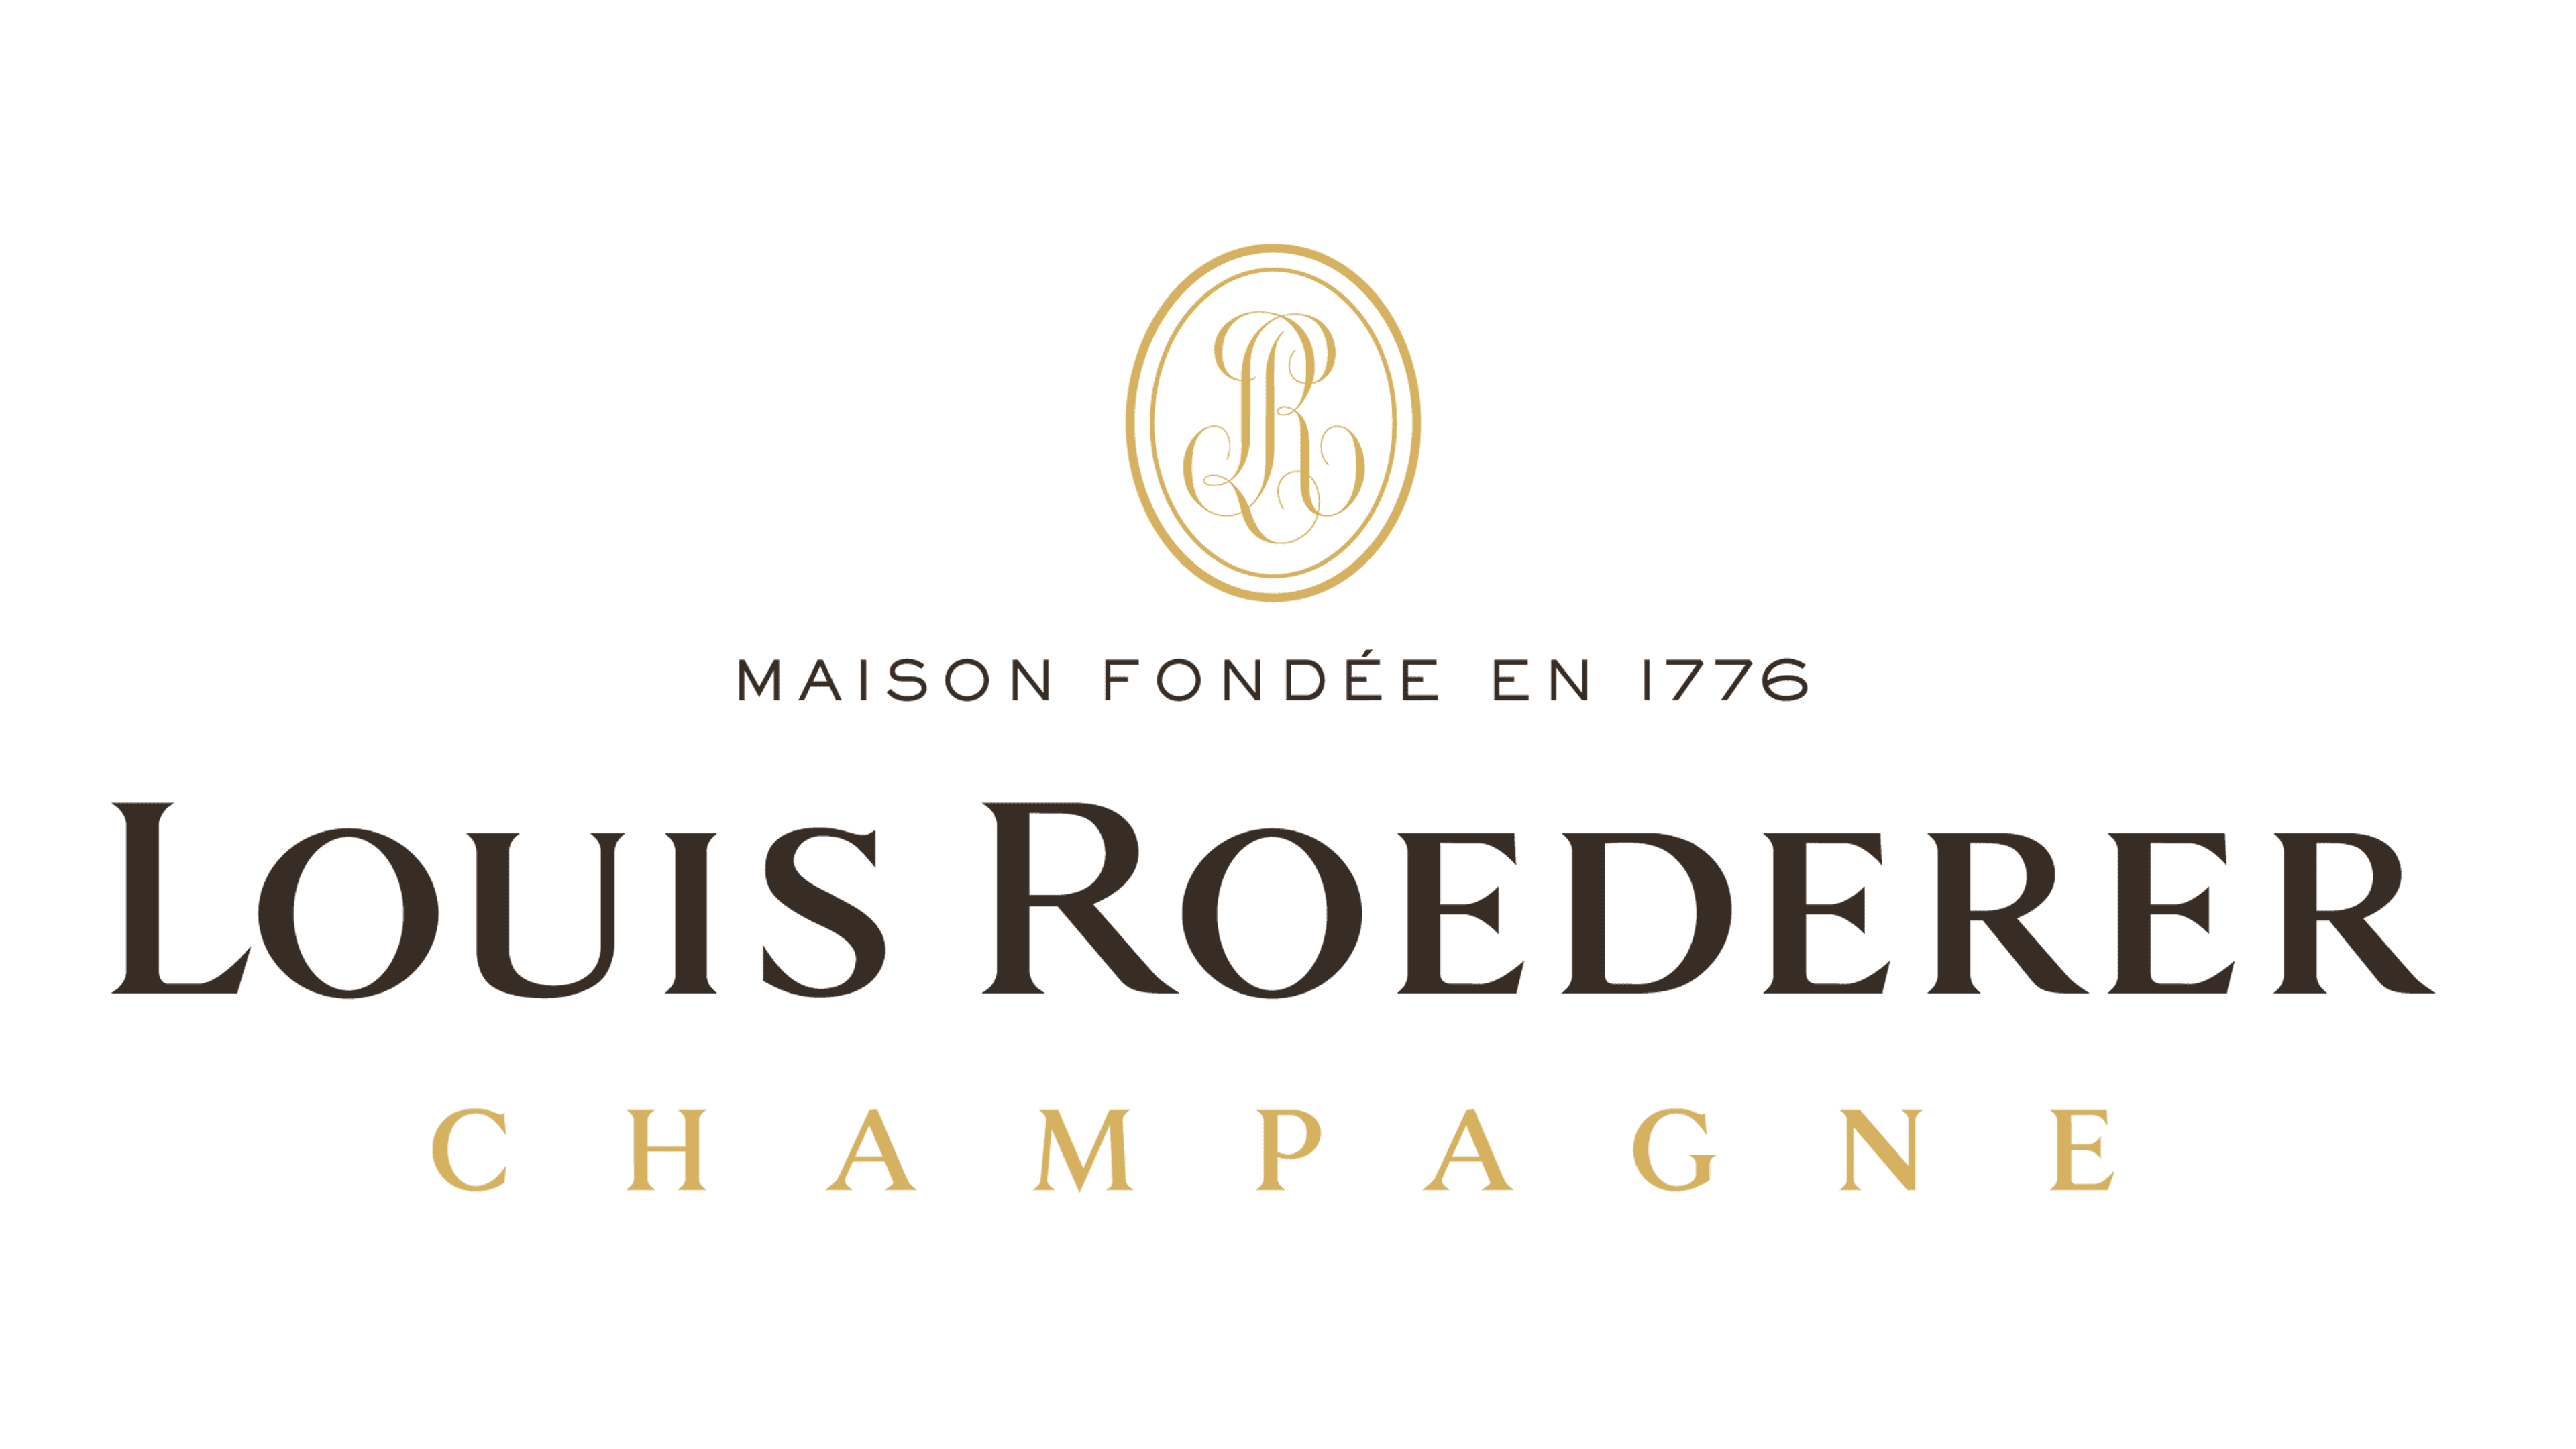 File:Champagne Louis Roederer logo.svg - Wikimedia Commons